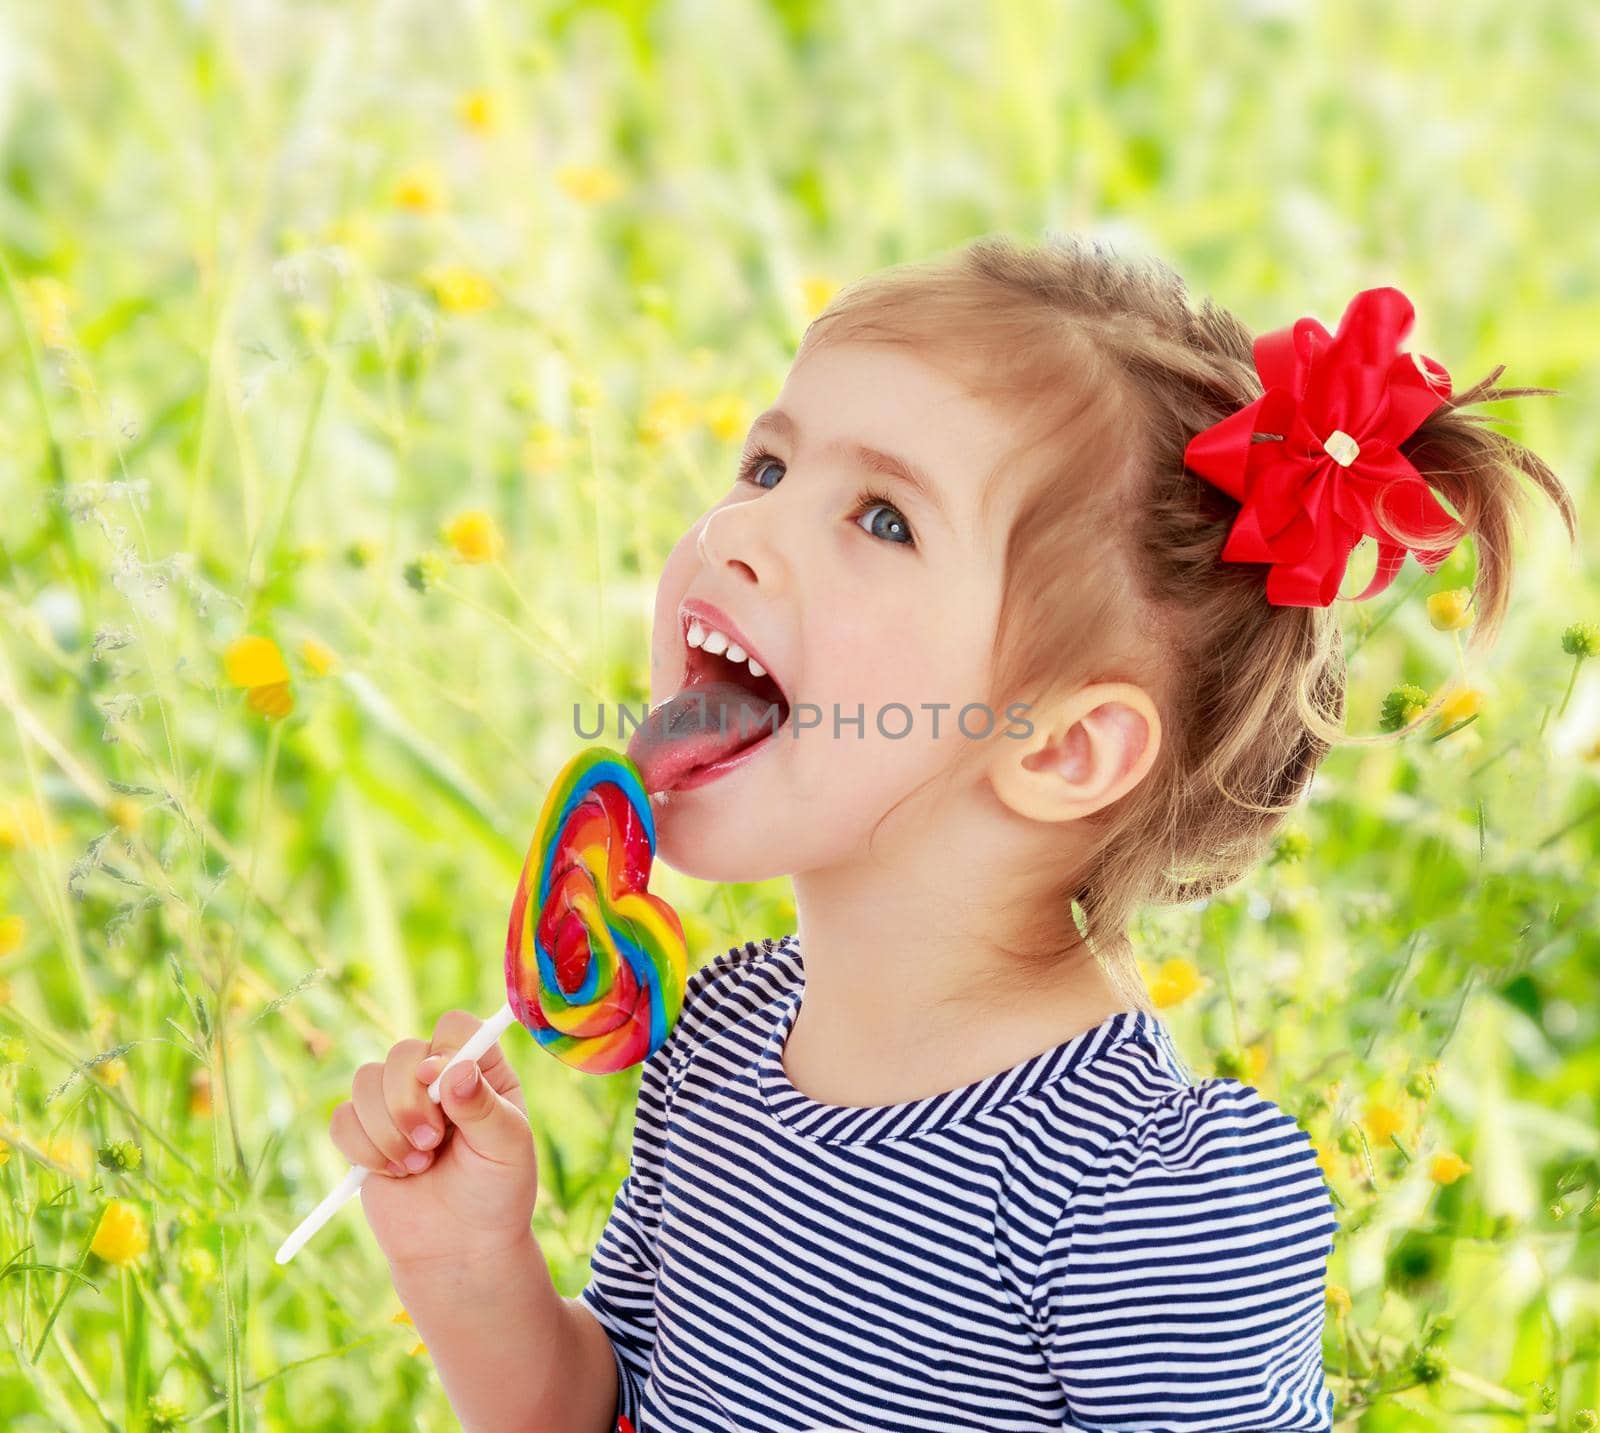 Cute little blonde girl with a red bow on her head, with pleasure licking colorful candy on a stick. Visible language which was painted in a candy color. Close-up.On blurred background of green grass